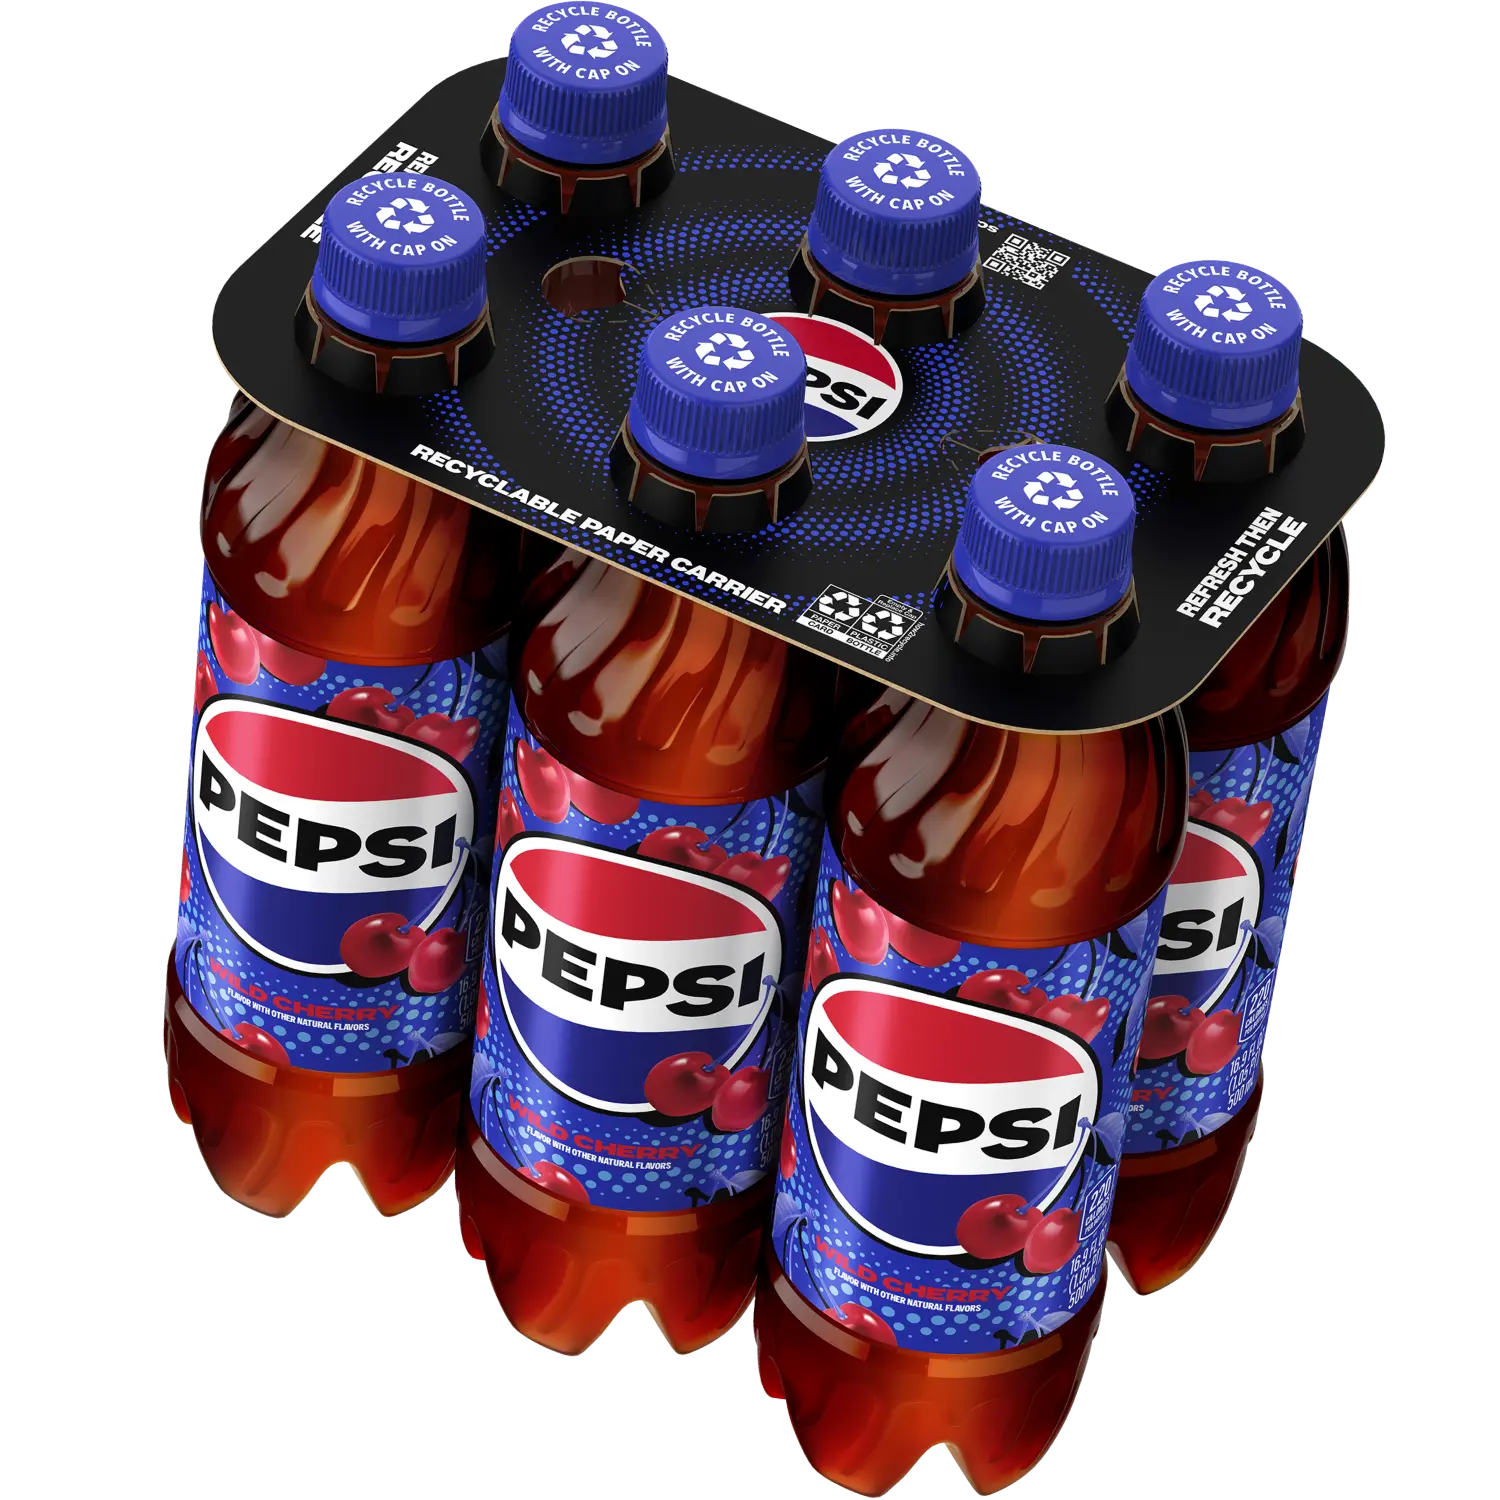 6 pack of Wild Cherry Pepsi bottles with a recyclable paper carrier